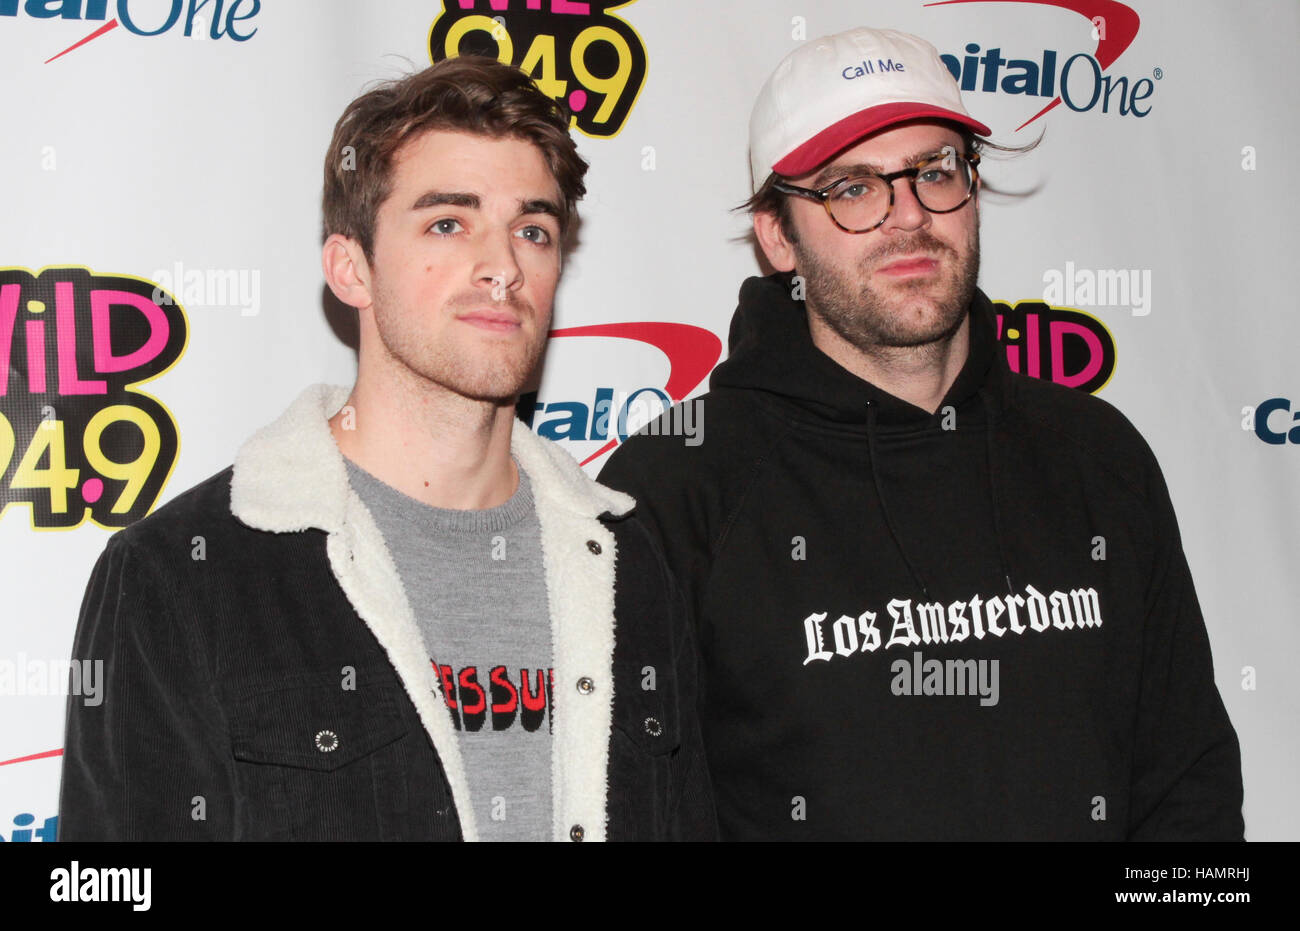 San Jose, USA. 01st Dec, 2016. Recording artist (L-R) Andrew Taggart and Alex Pall of the music duo The Chainsmokers attend WiLD 94.9's FM's Jingle Ball 2016 presented by Capital One at SAP Center on December 1, 2016 in San Jose, California. Credit:  The Stock Photo